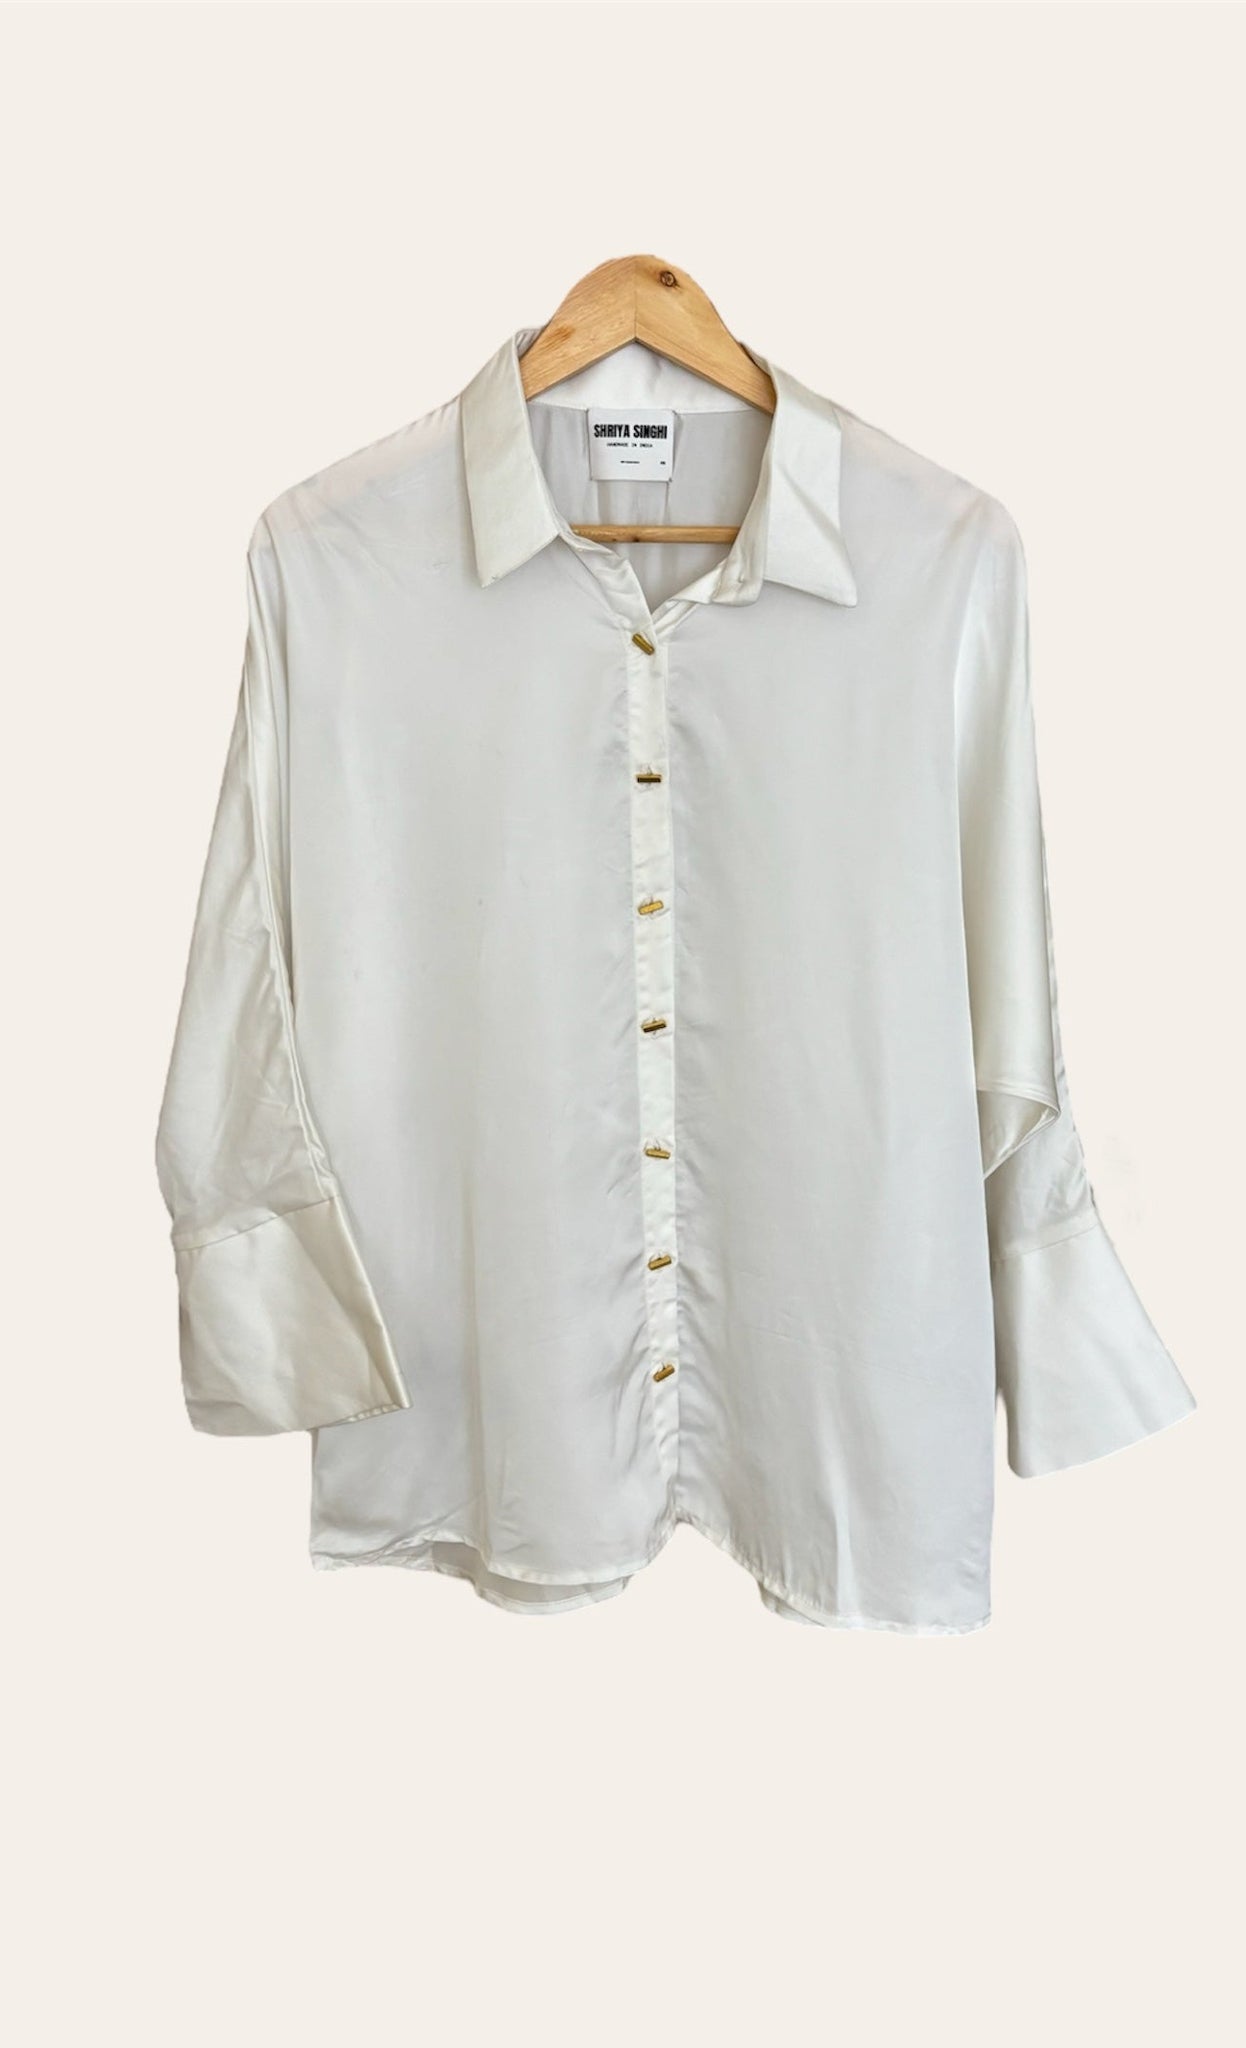 Lea One Size Shirt In Ivory/white